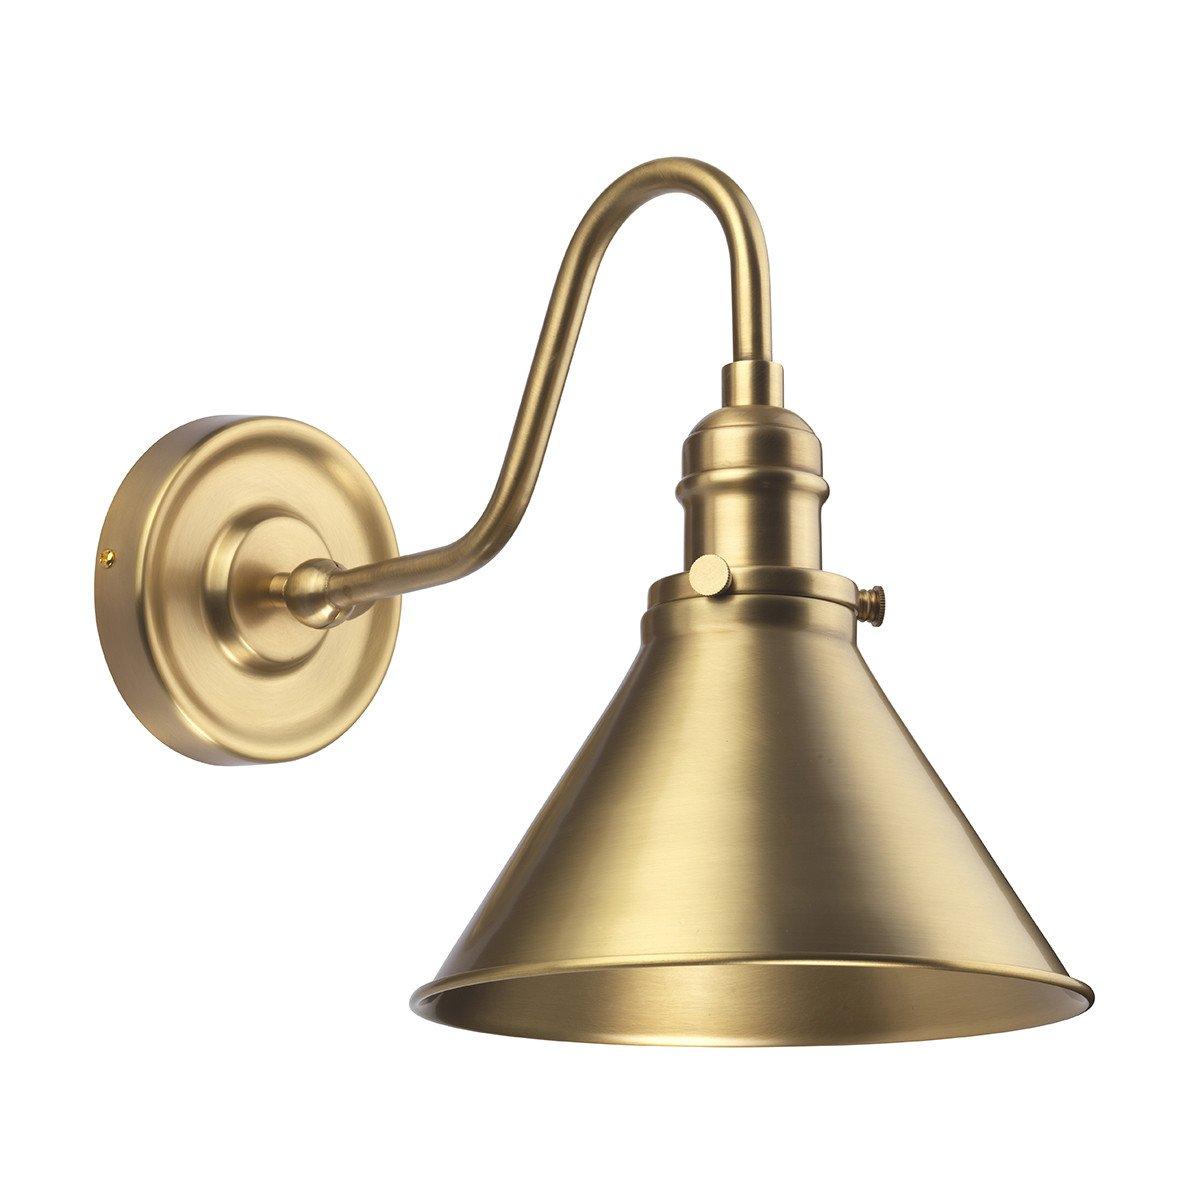 Provence 1 Light Indoor Dome Wall Light Aged Brass E27